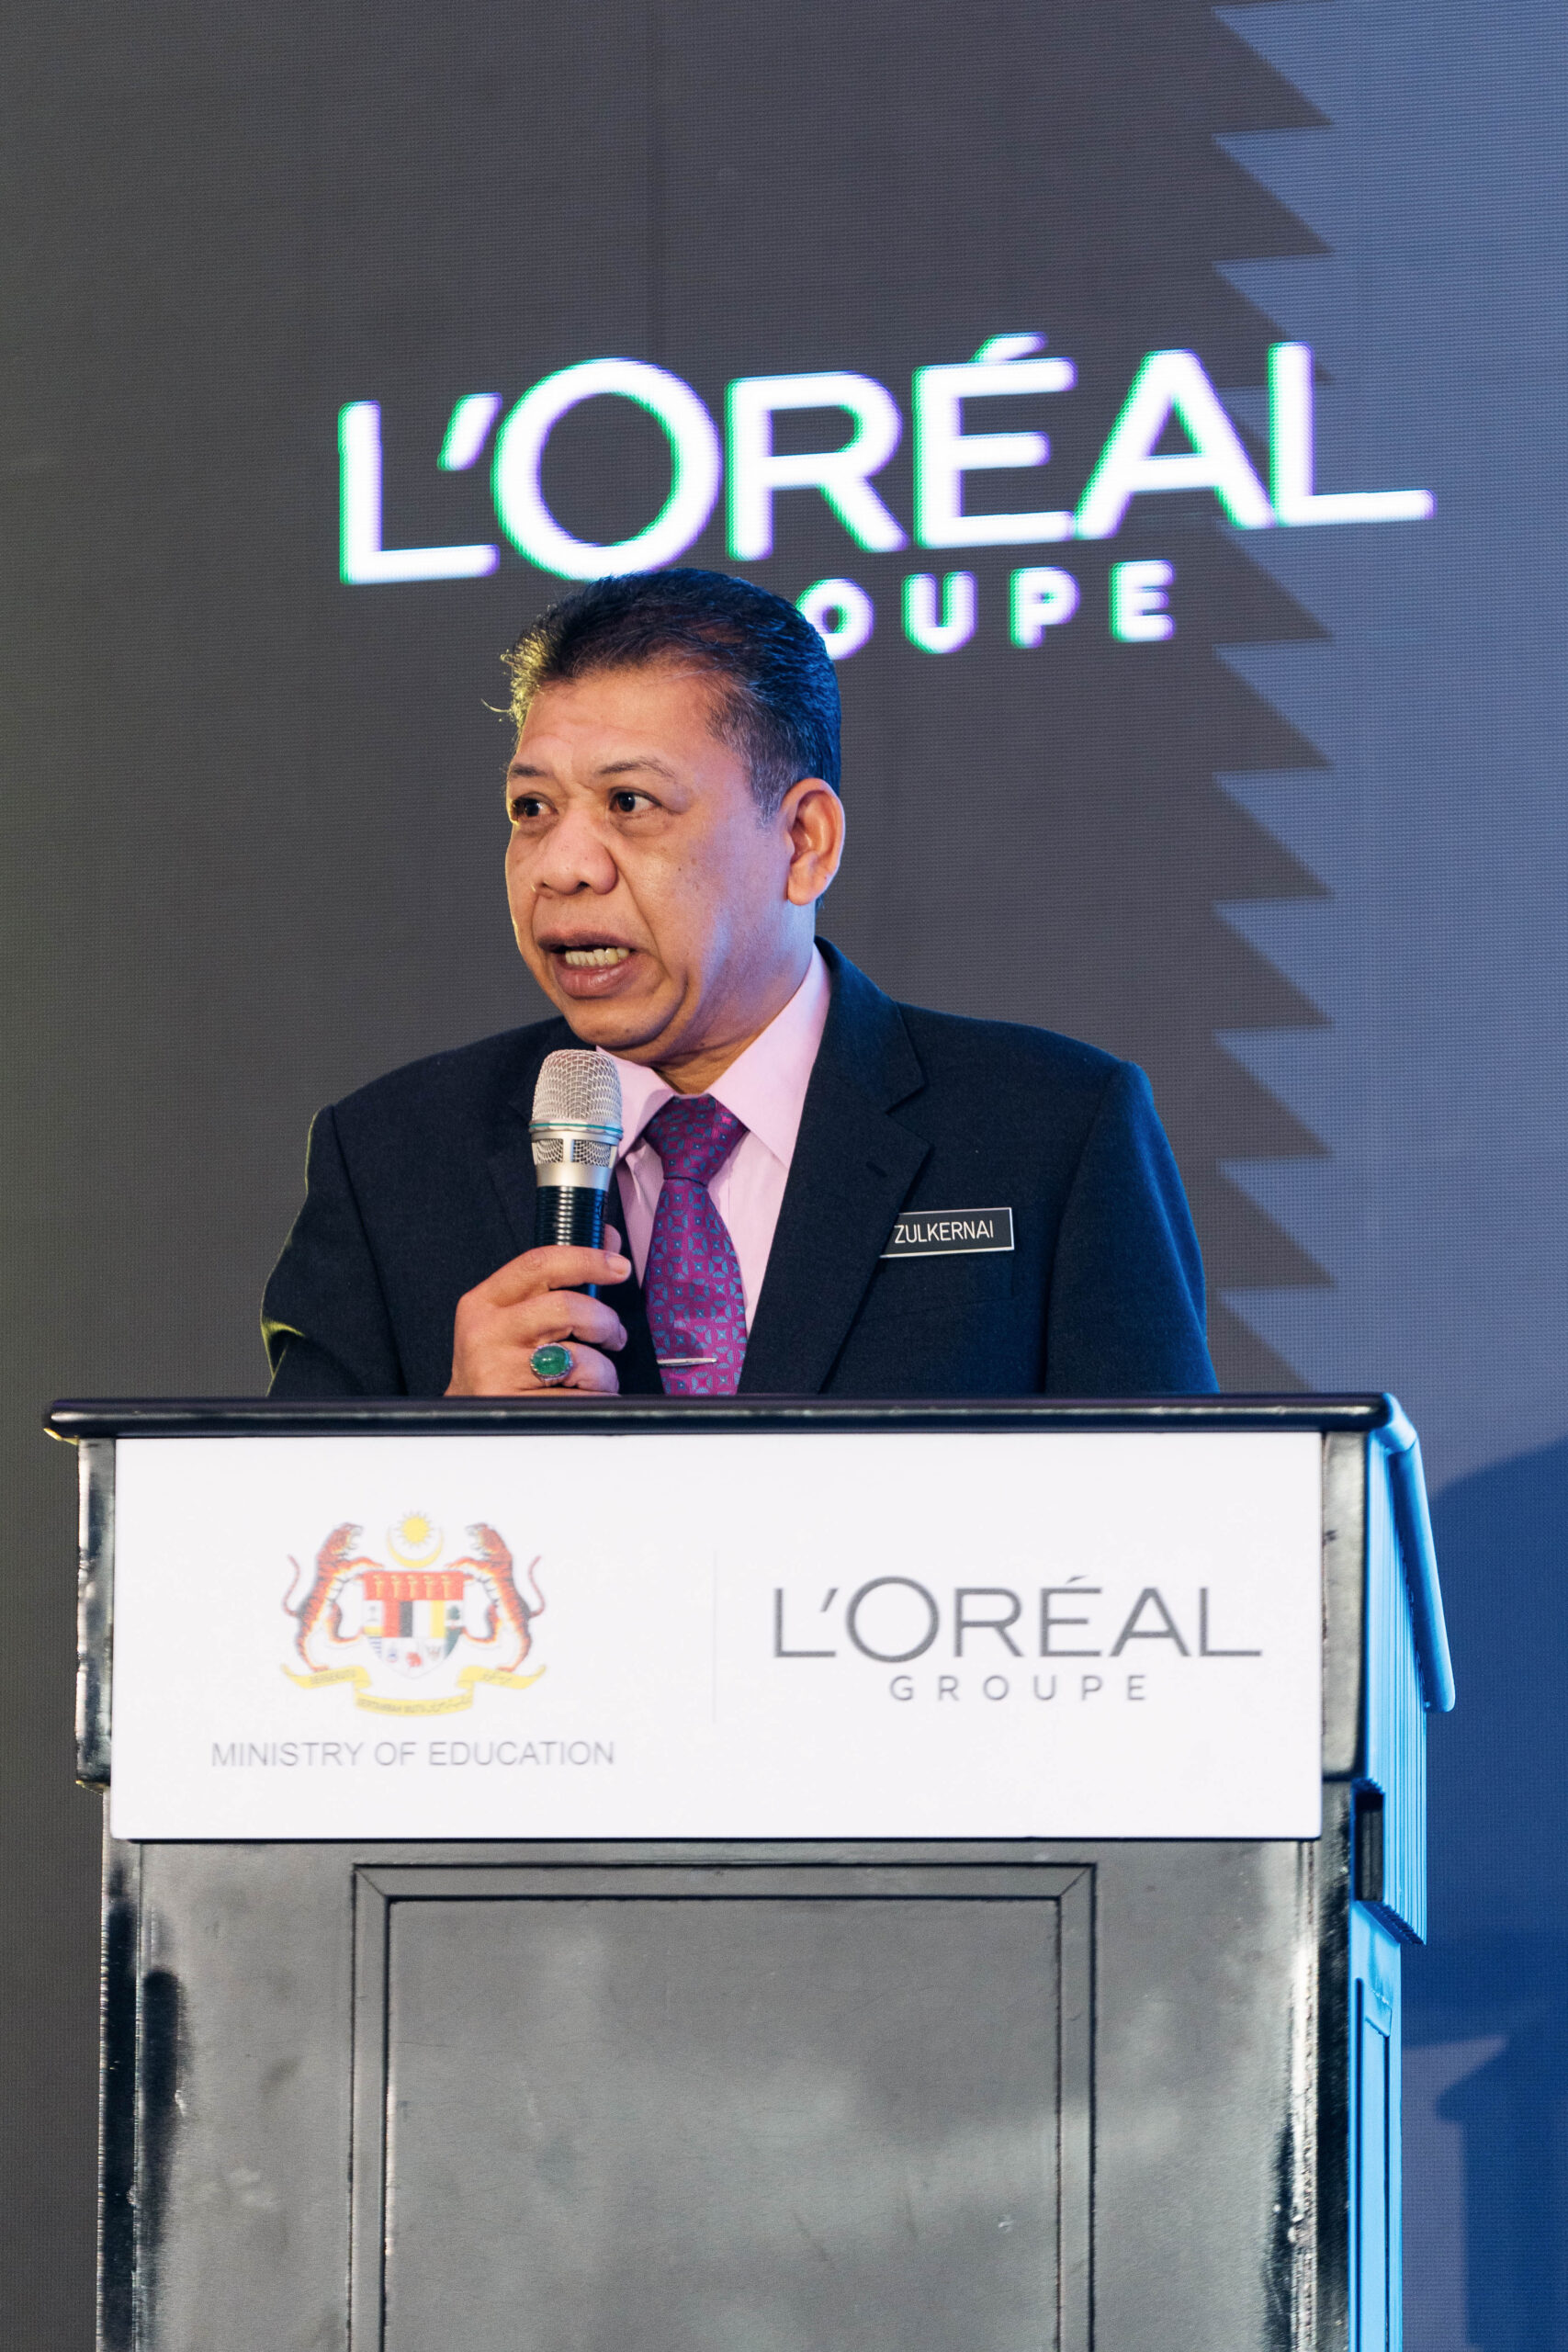 L'oréal malaysia partners with ministry of education to support and elevate local vocational training | weirdkaya